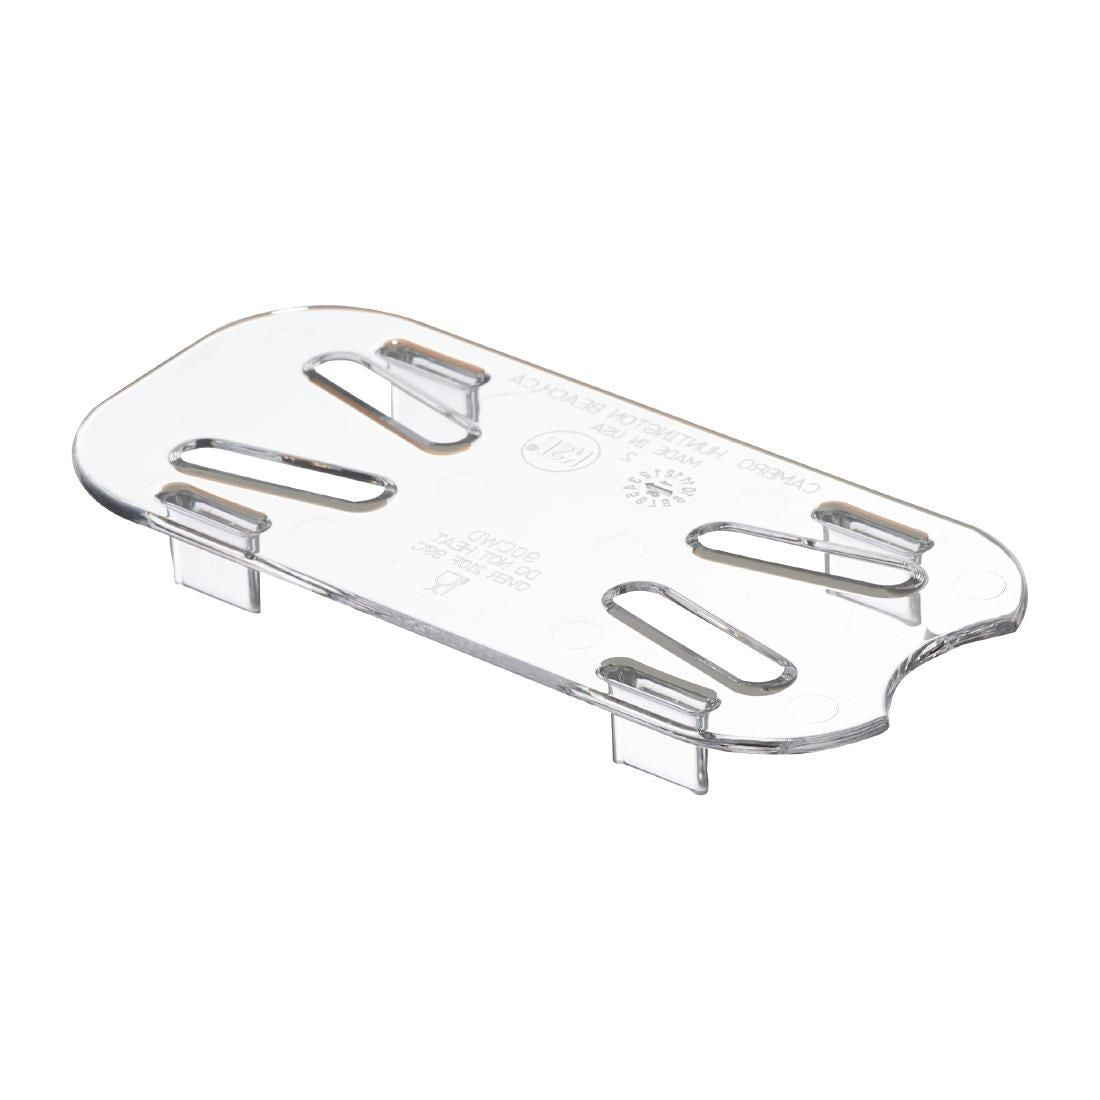 DM760 Cambro Polycarbonate 1/9 Gastronorm Pan Drain Shelf JD Catering Equipment Solutions Ltd